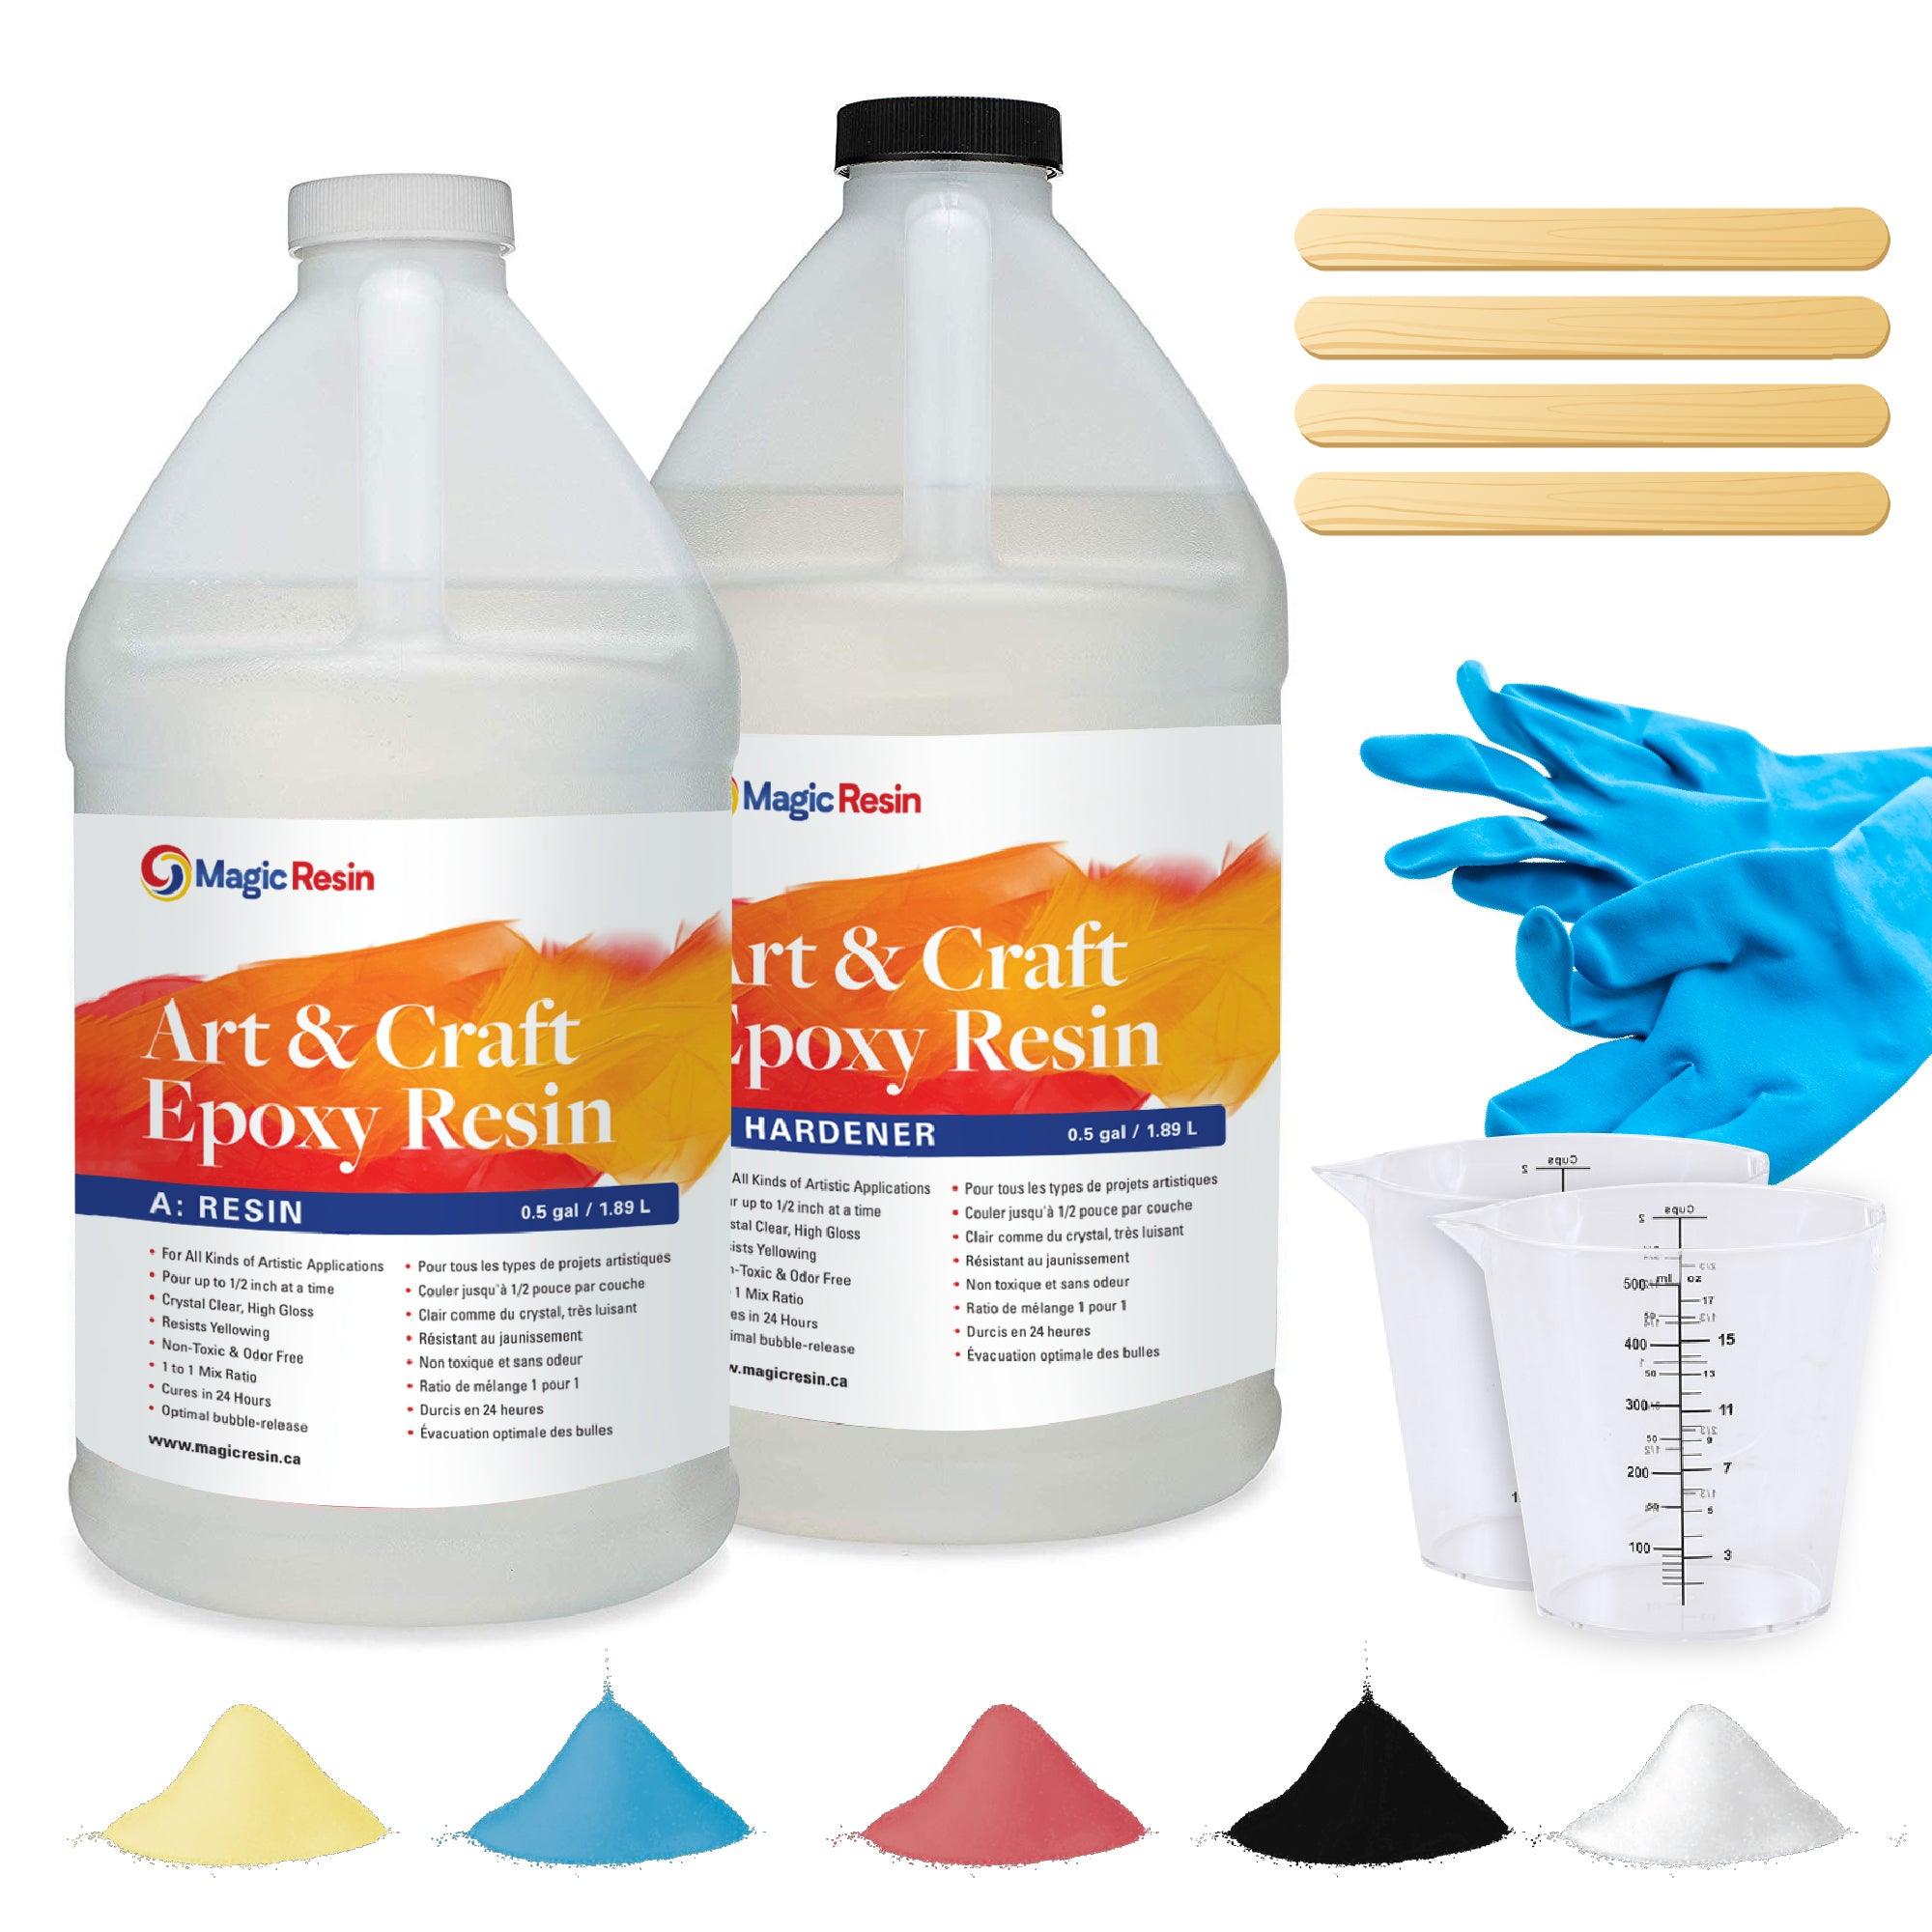 1 Gallon (3.78 L) | Art & Craft Epoxy Resin Kit | Includes 3 pairs of gloves, 2 cups, 4 sticks & 5 x 5g mica powder bags | Free express shipping - Magic Resin USA